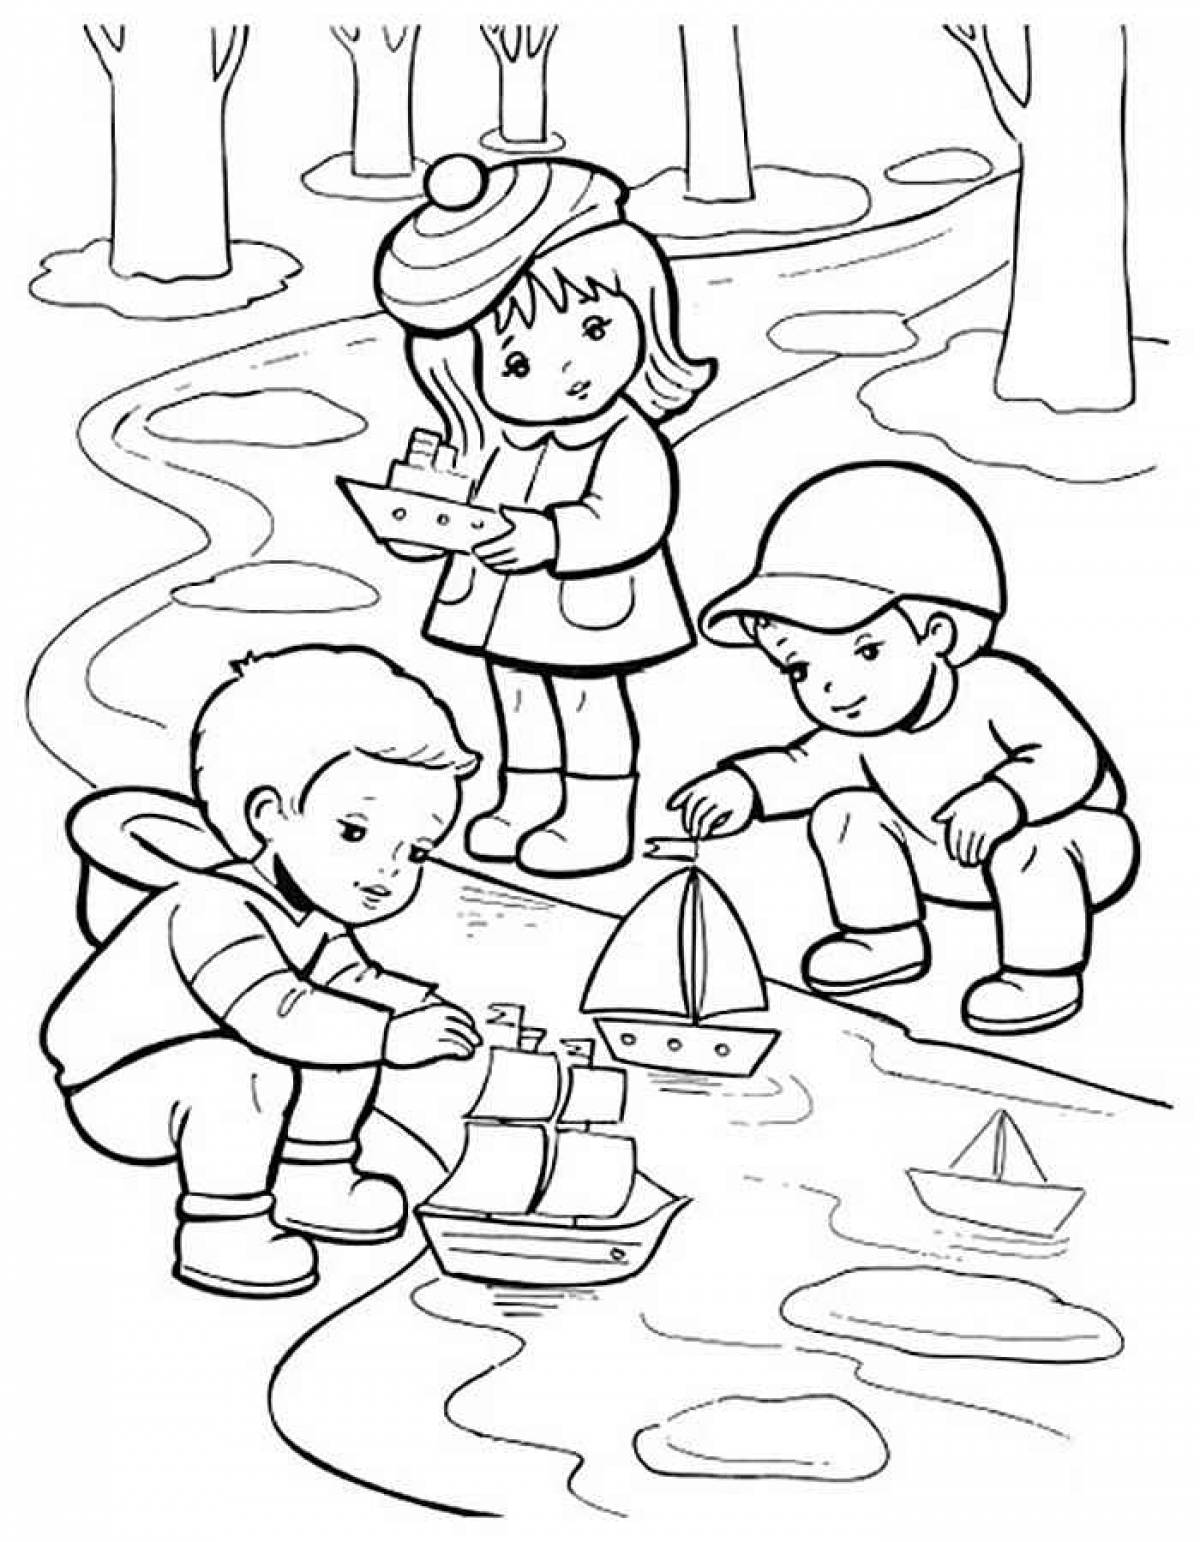 Coloring pages for children 6 years old for free